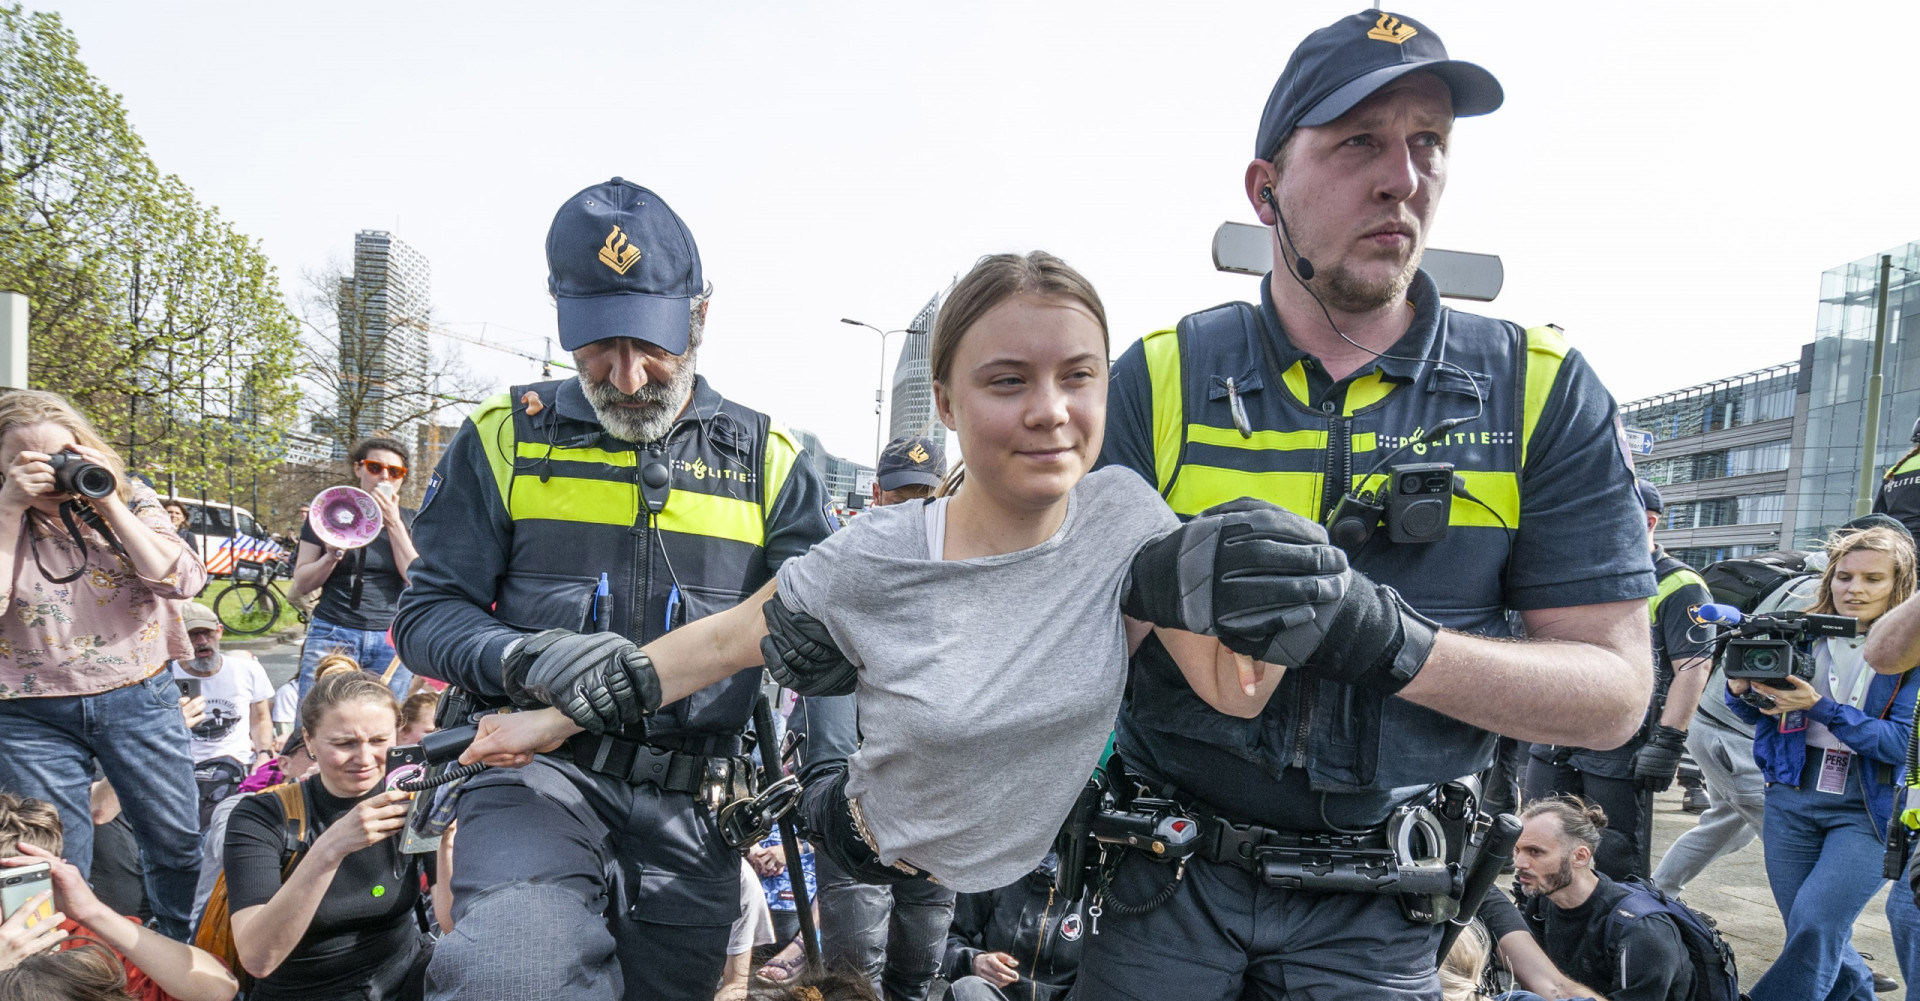 Greta Thunberg: a young woman trying to save the world